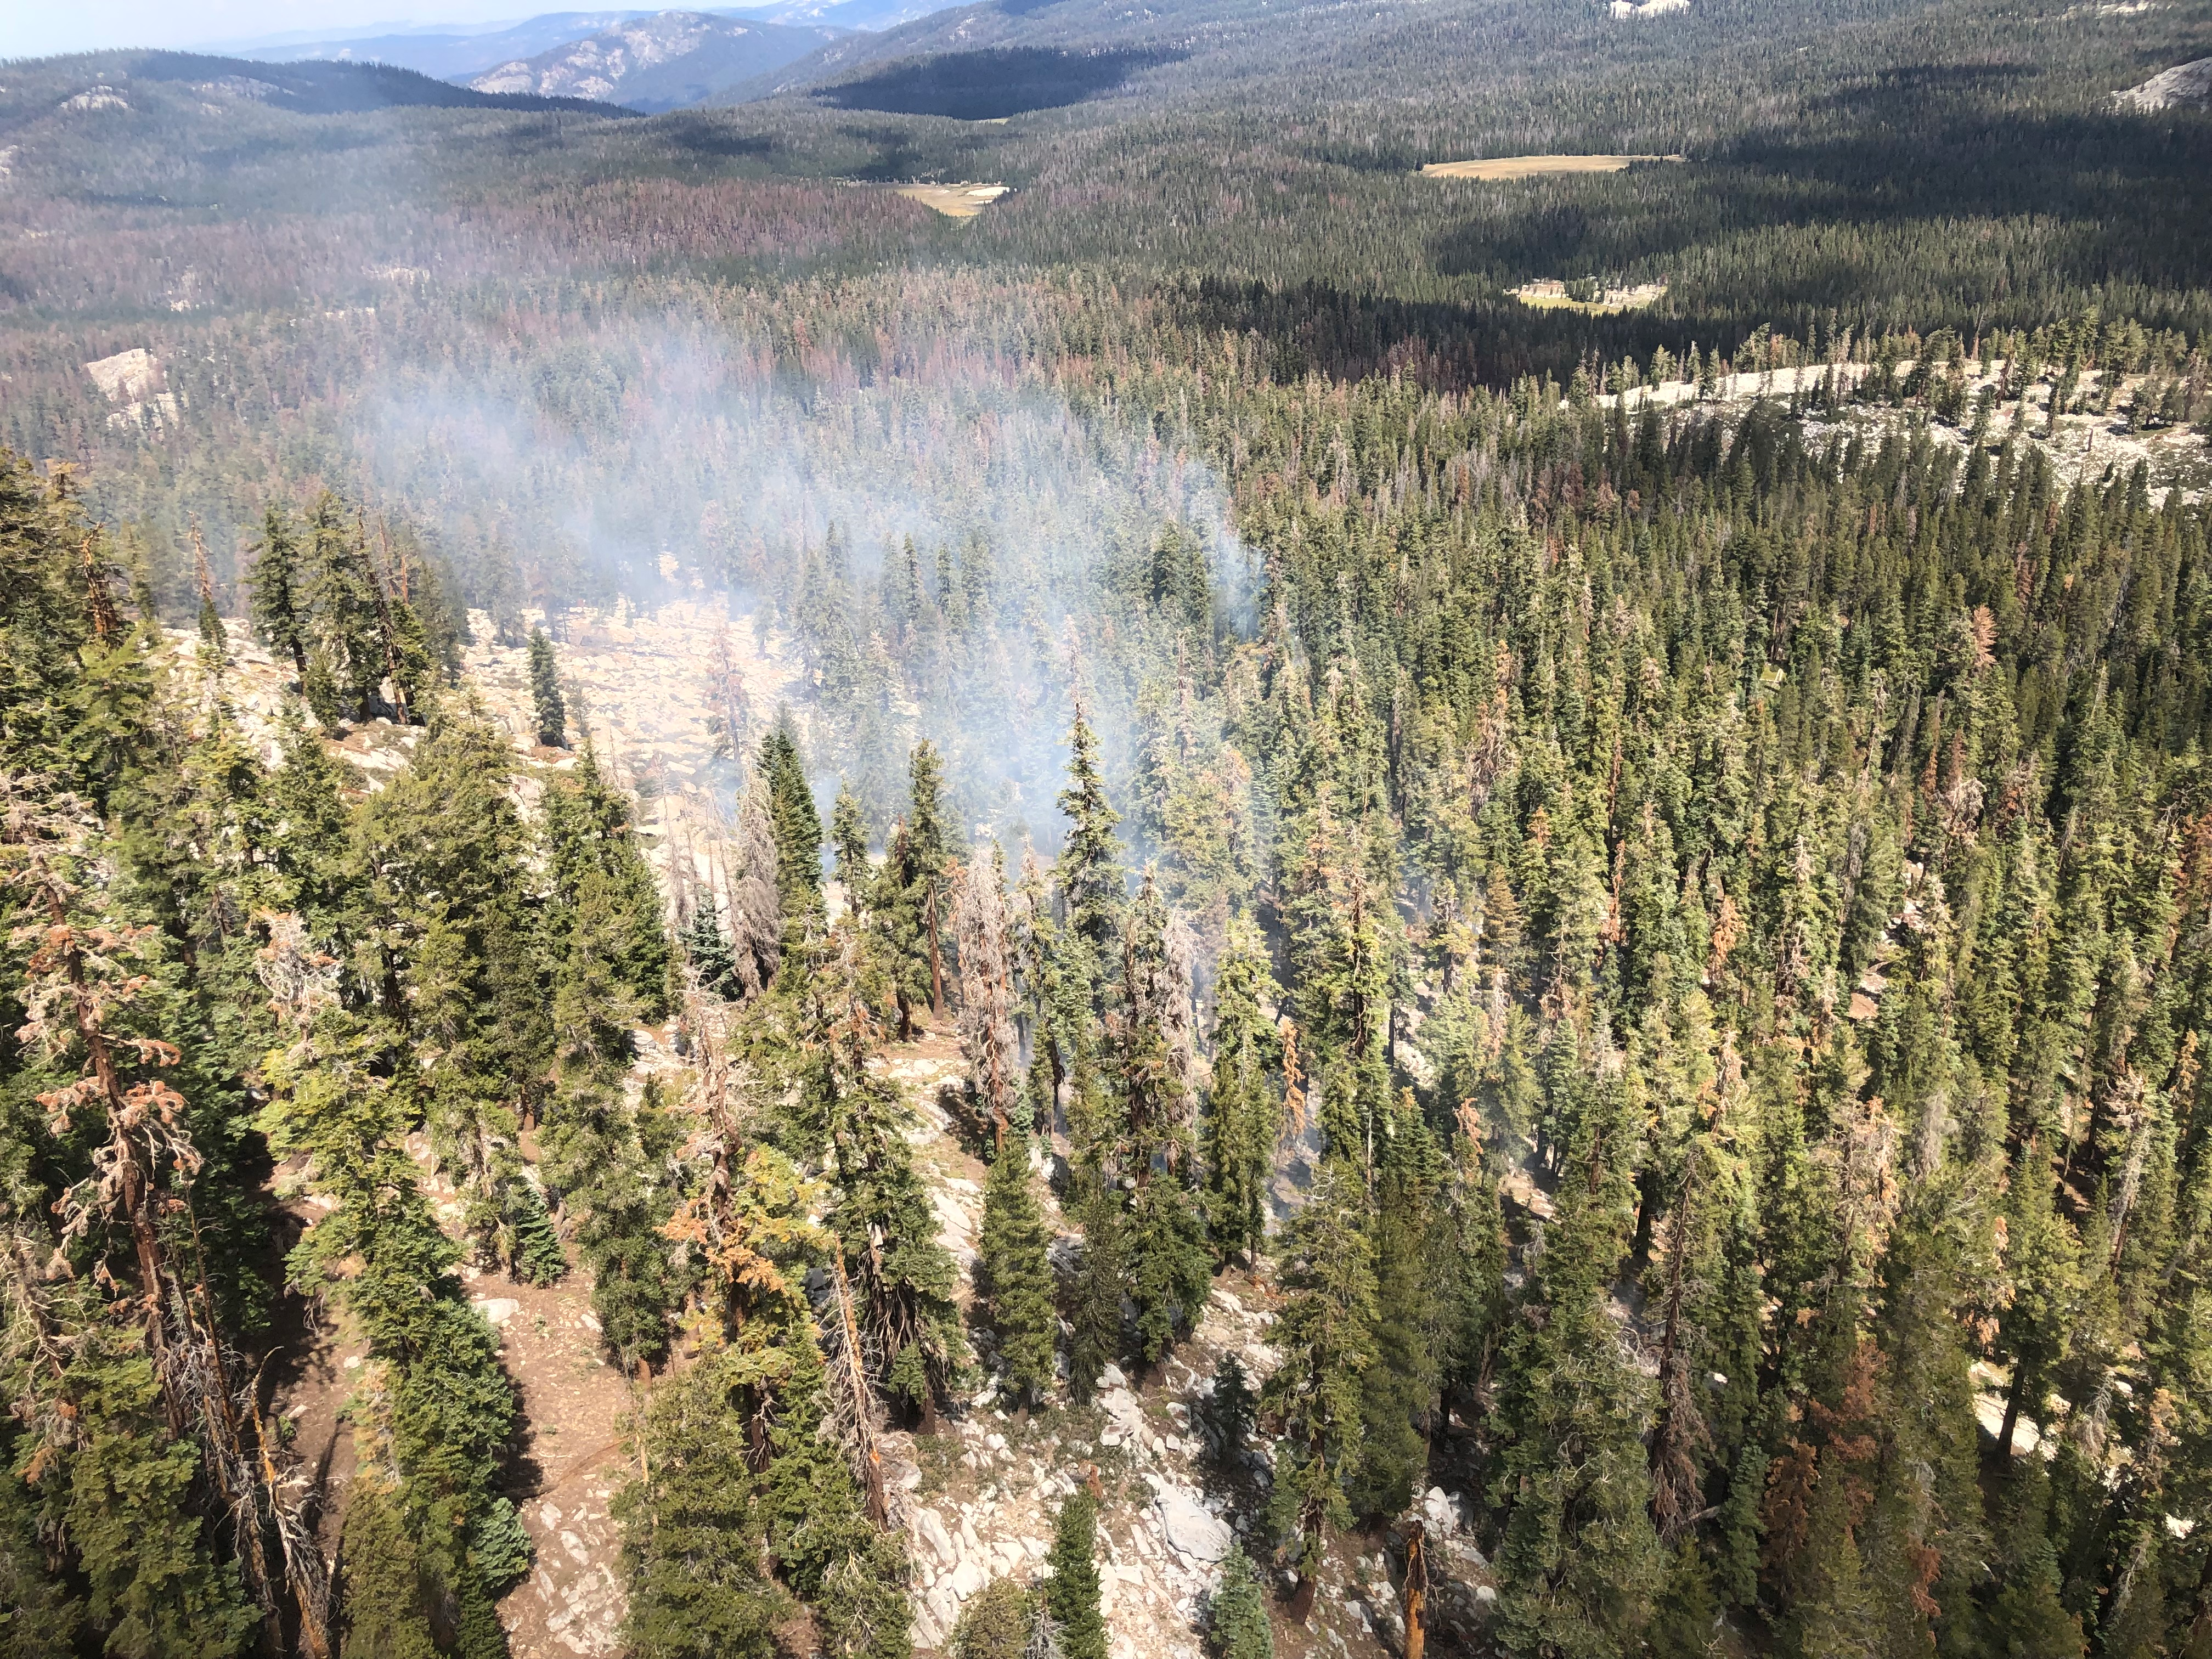 A plume of white gray smoke rises from a sparsely forested mountain landscape seen from above.